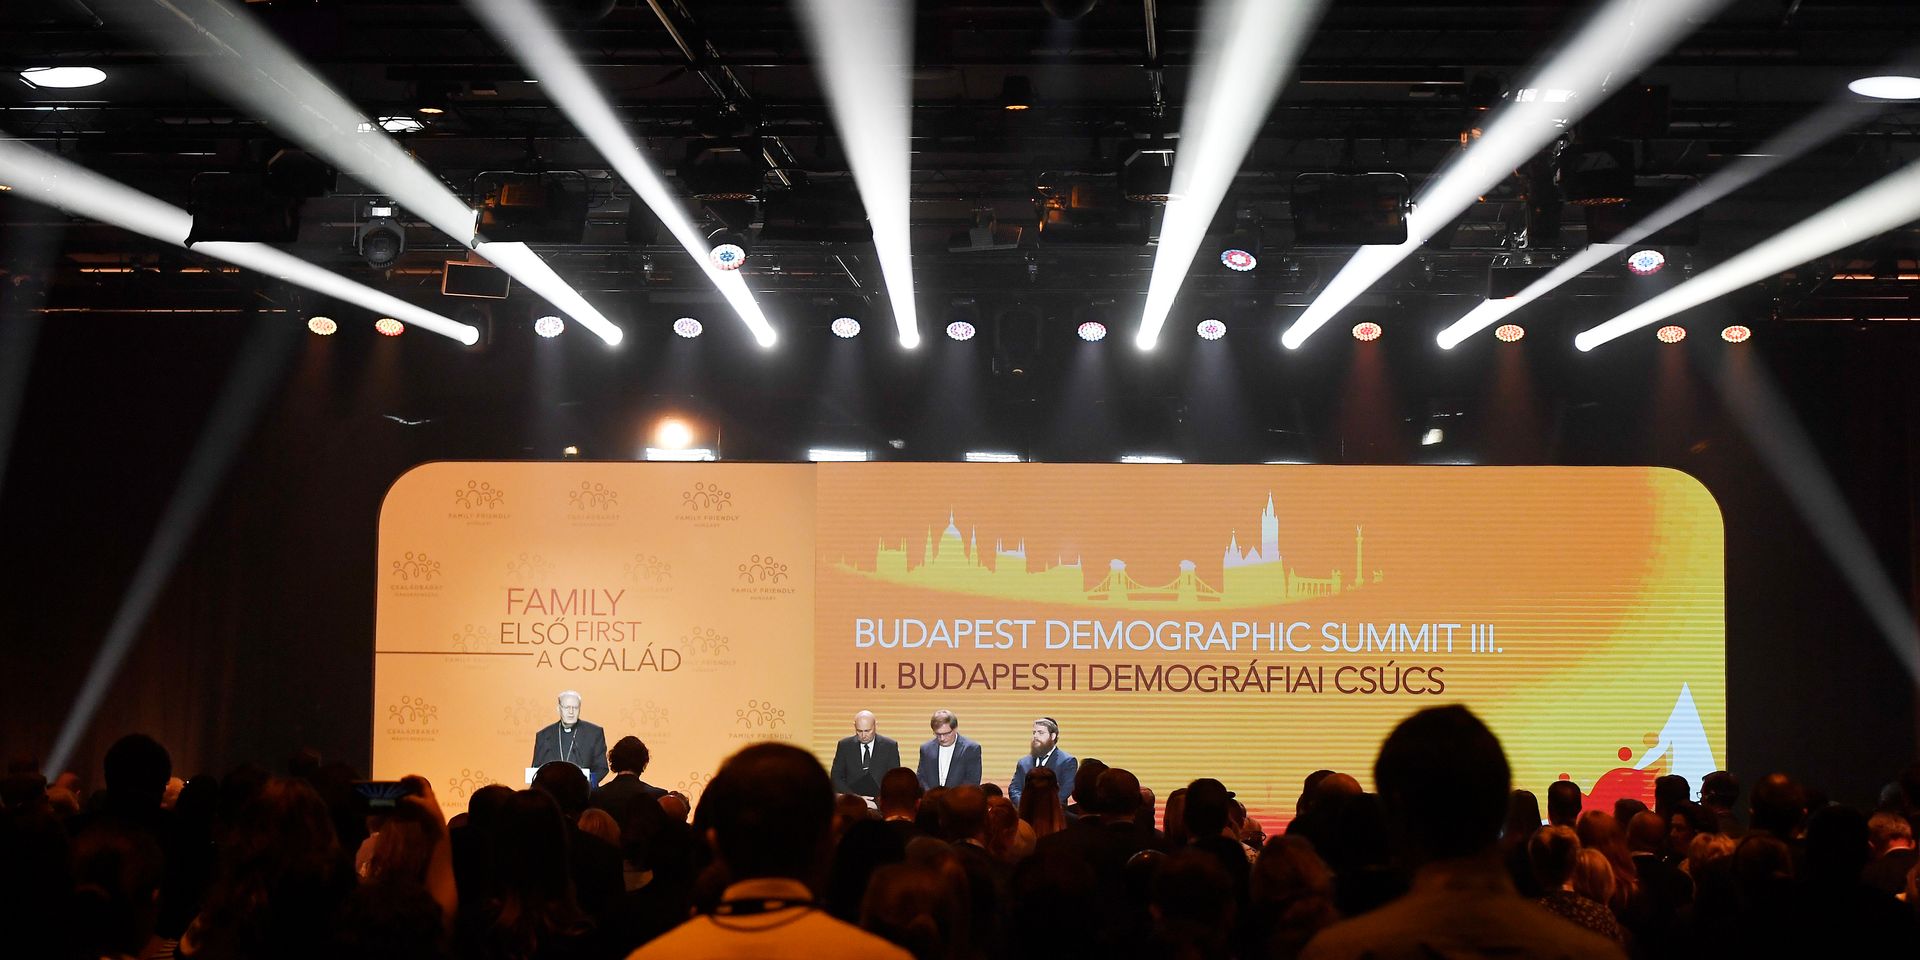 The 3rd Budapest Demographic Summit has launched 